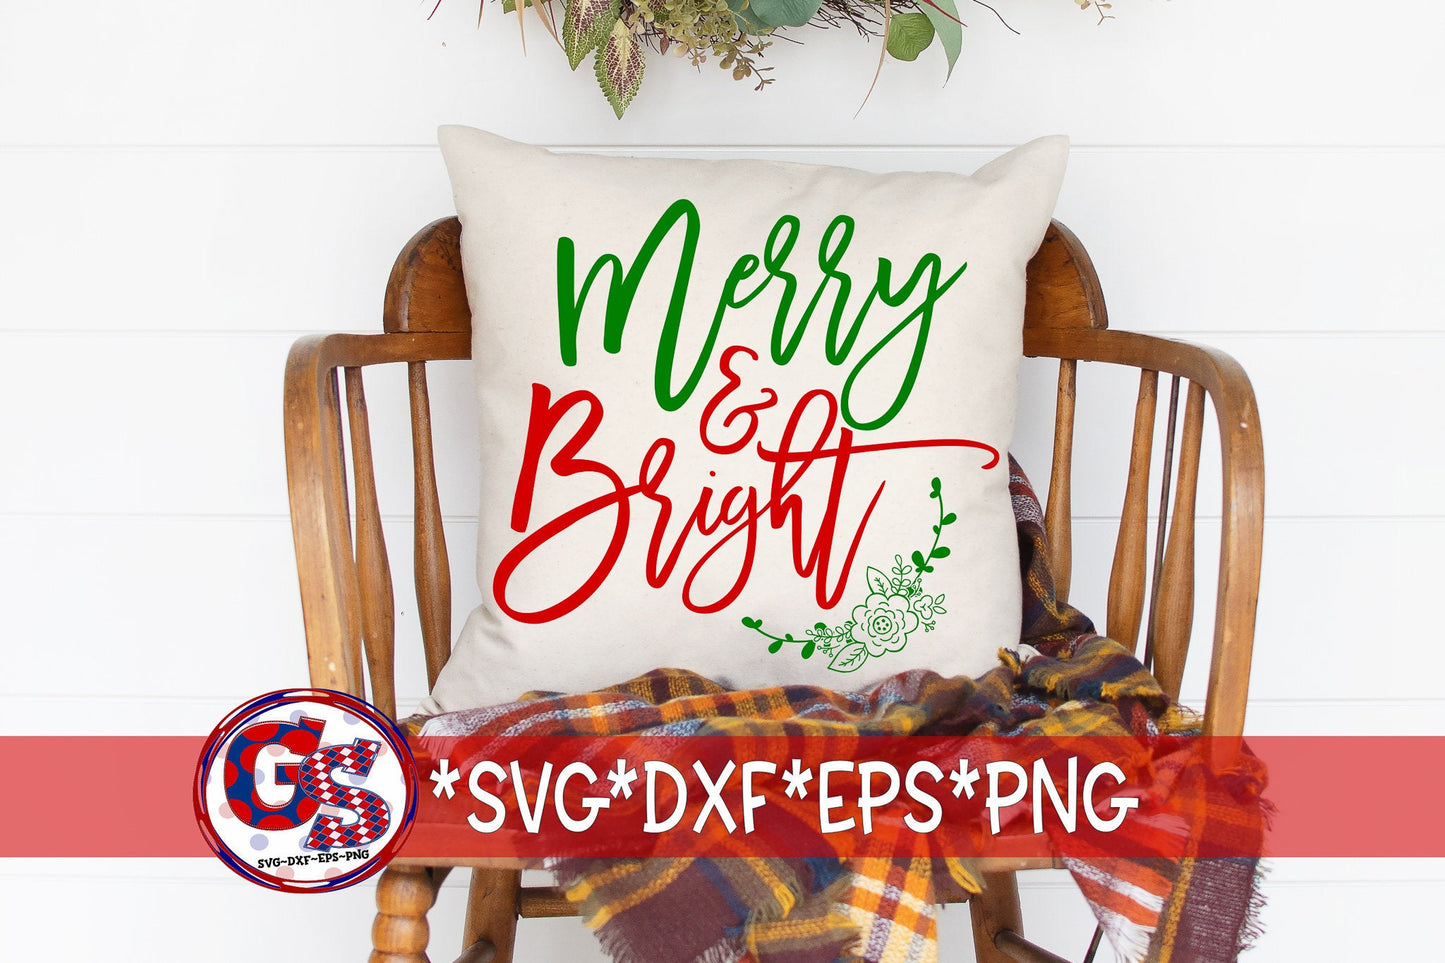 Merry & Bright svg dxf eps png Christmas SvG | Merry SvG | Merry Christmas DxF | Merry and Bright SvG | Merry SvGInstant Download Cut Files